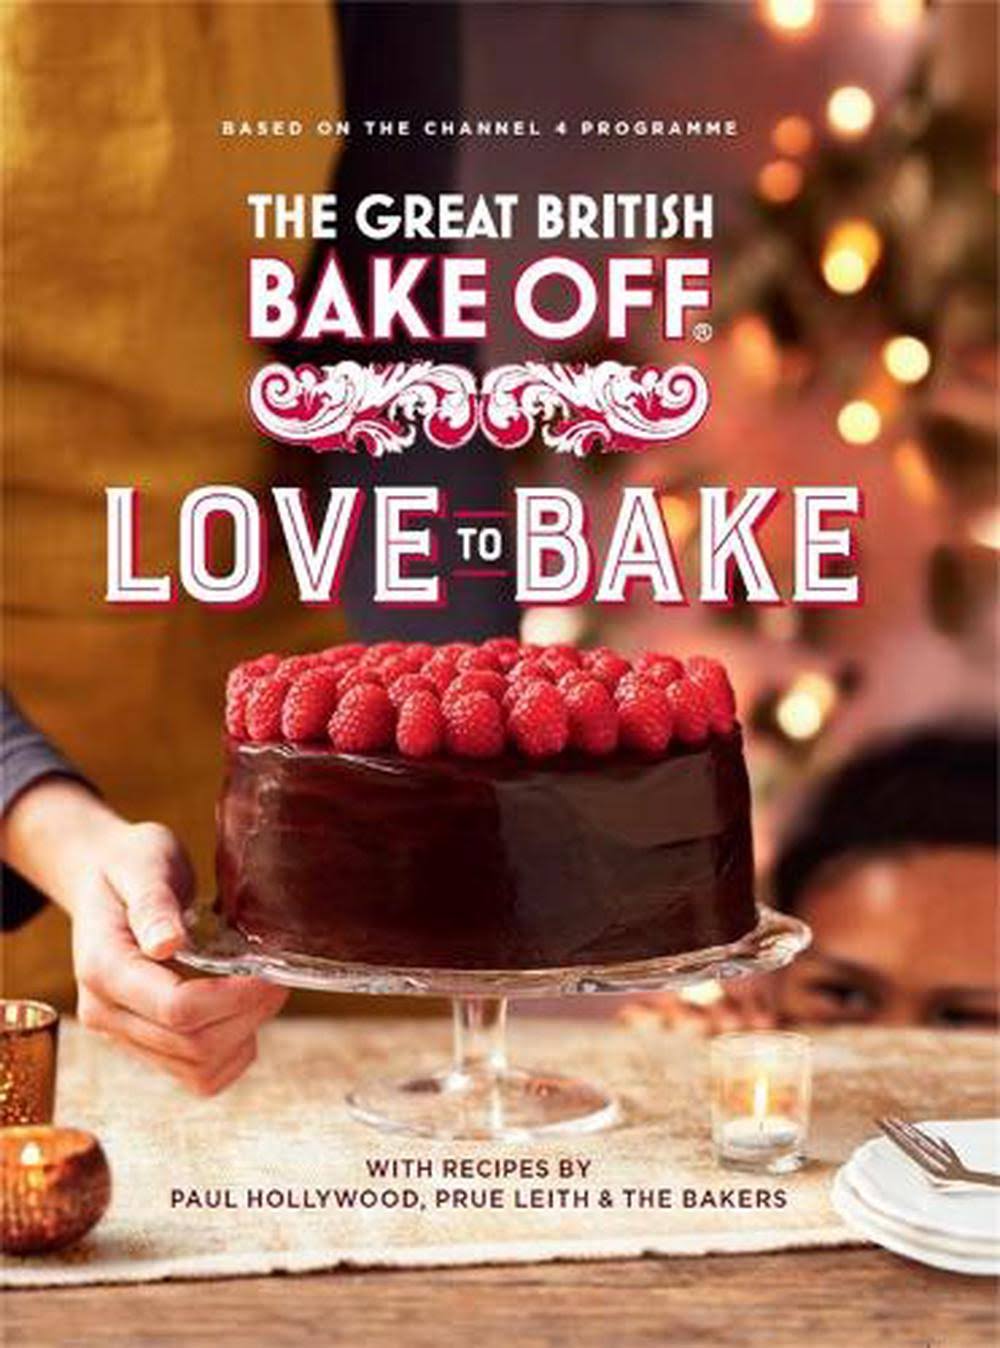 The Great British Bake Off - Love to Bake